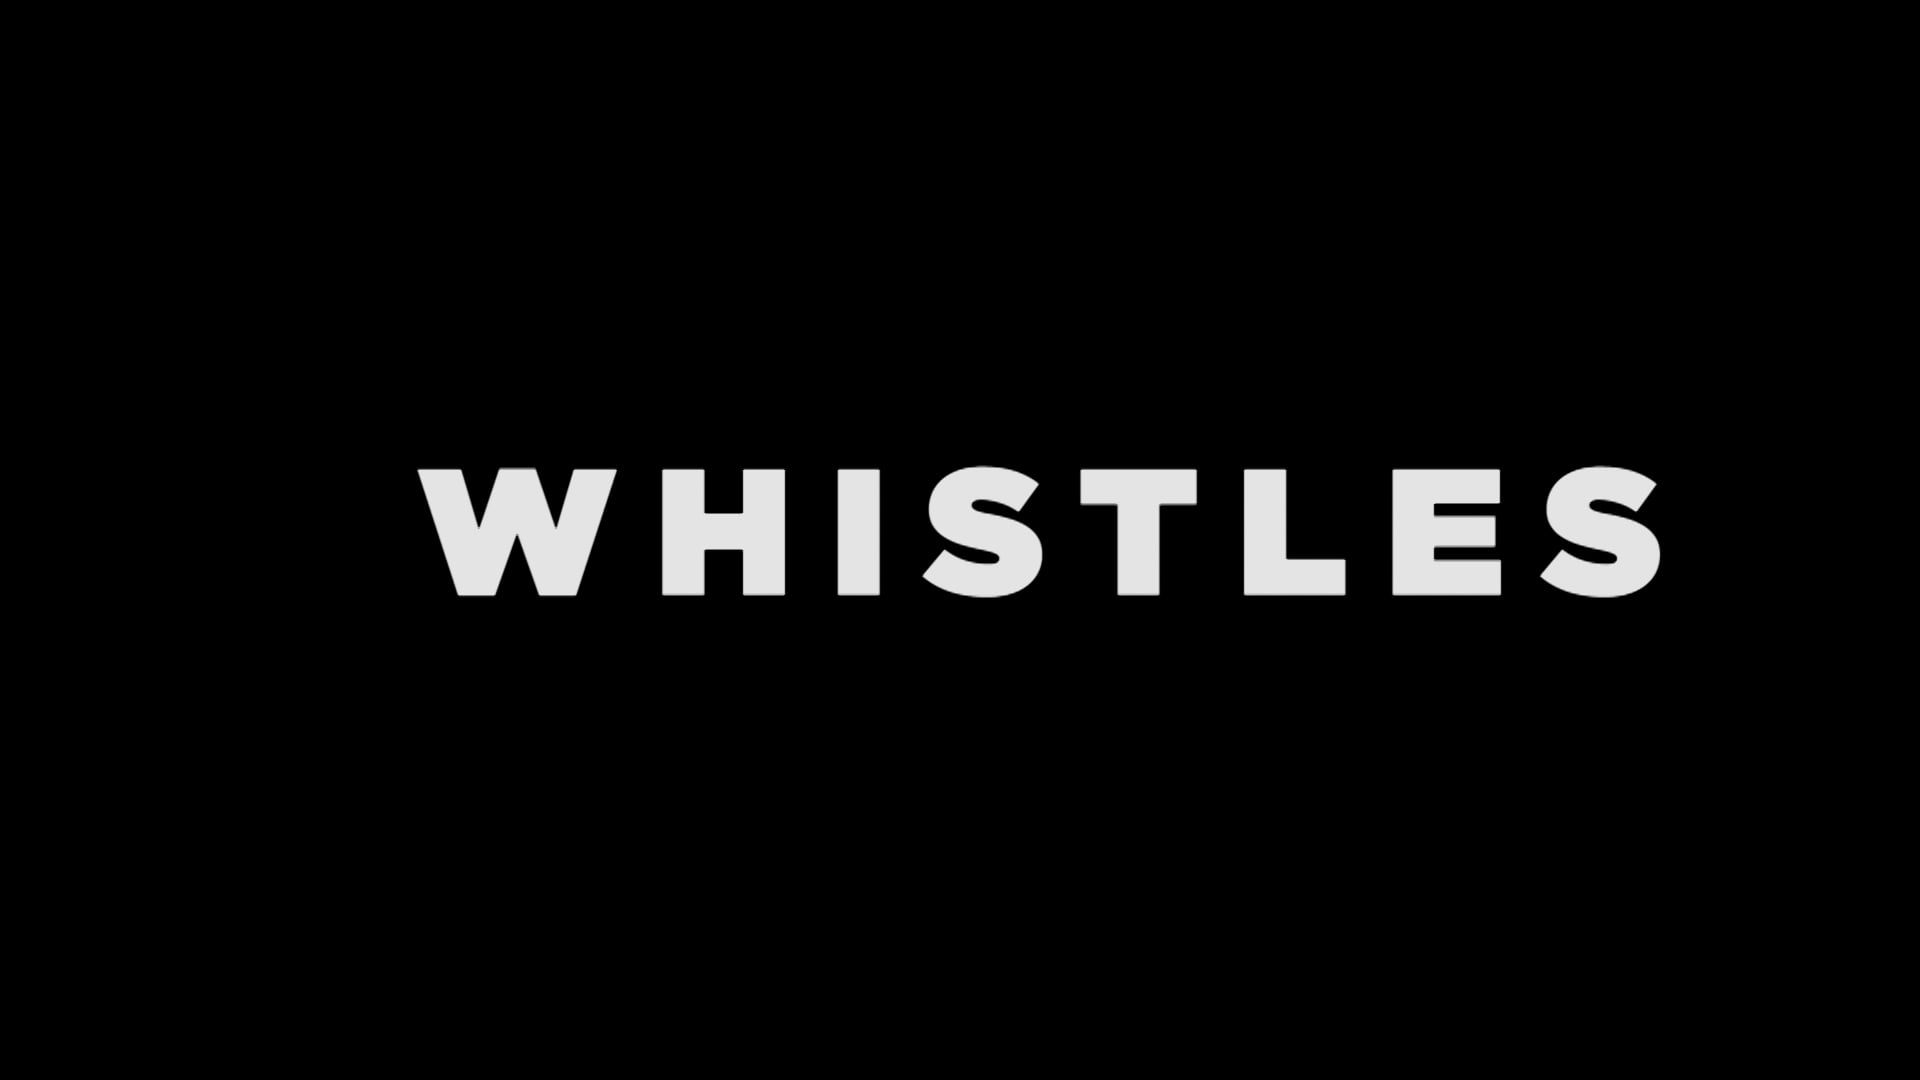 How To Stop Worrying To Whistle(s)